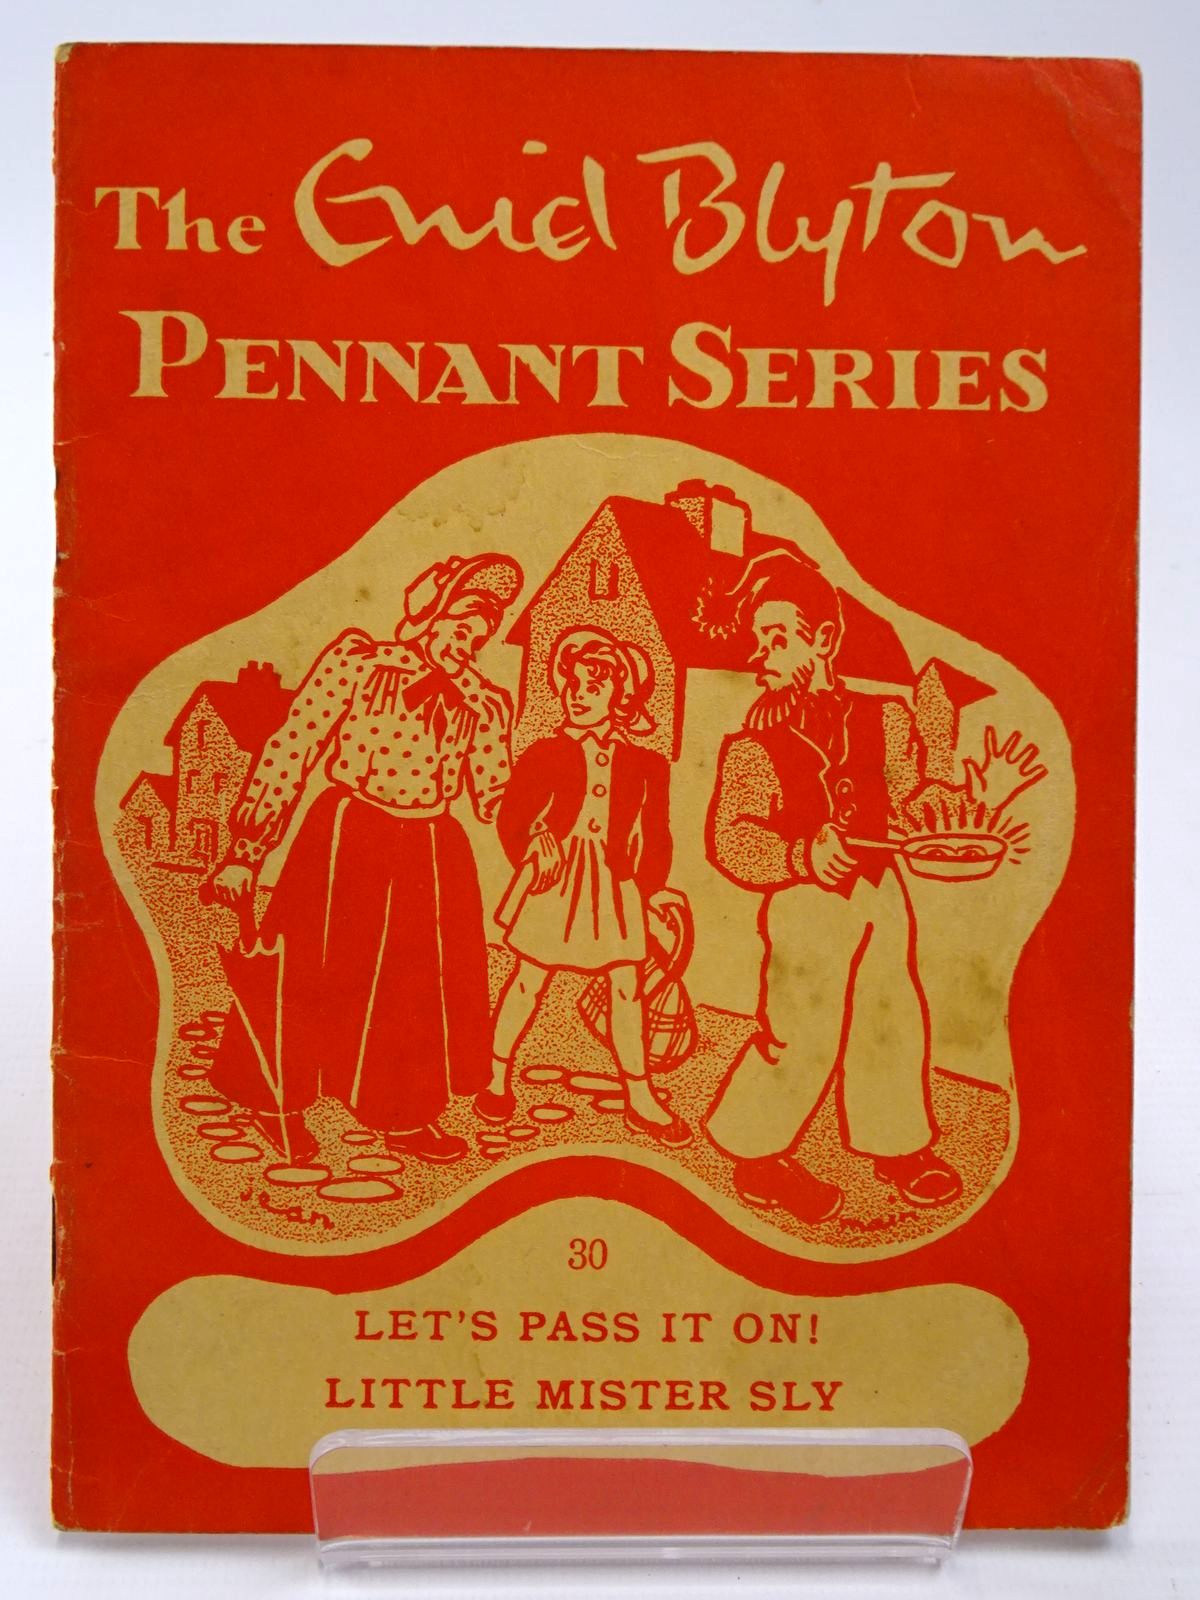 Photo of THE ENID BLYTON PENNANT SERIES No. 30 LET'S PASS IT ON! / LITTLE MISTER SLY written by Blyton, Enid illustrated by Soper, Eileen
Main, Jean published by Macmillan & Co. Ltd. (STOCK CODE: 2130525)  for sale by Stella & Rose's Books